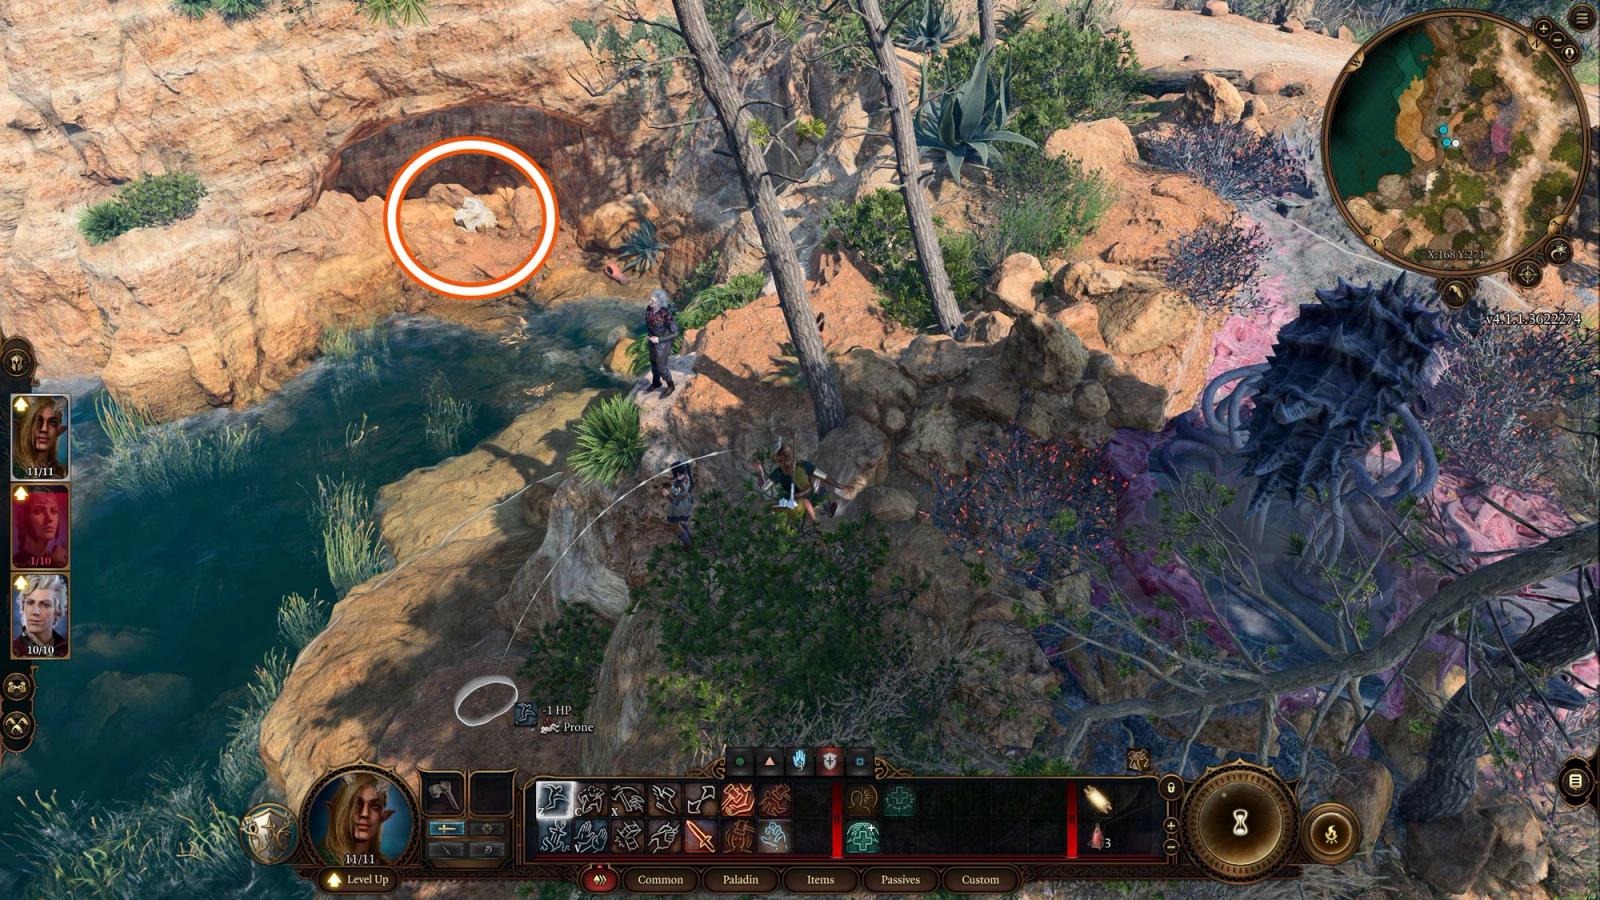 An in-game screenshot showing the party preparing to jump to the hidden cove where the Scuffed Rock waits.